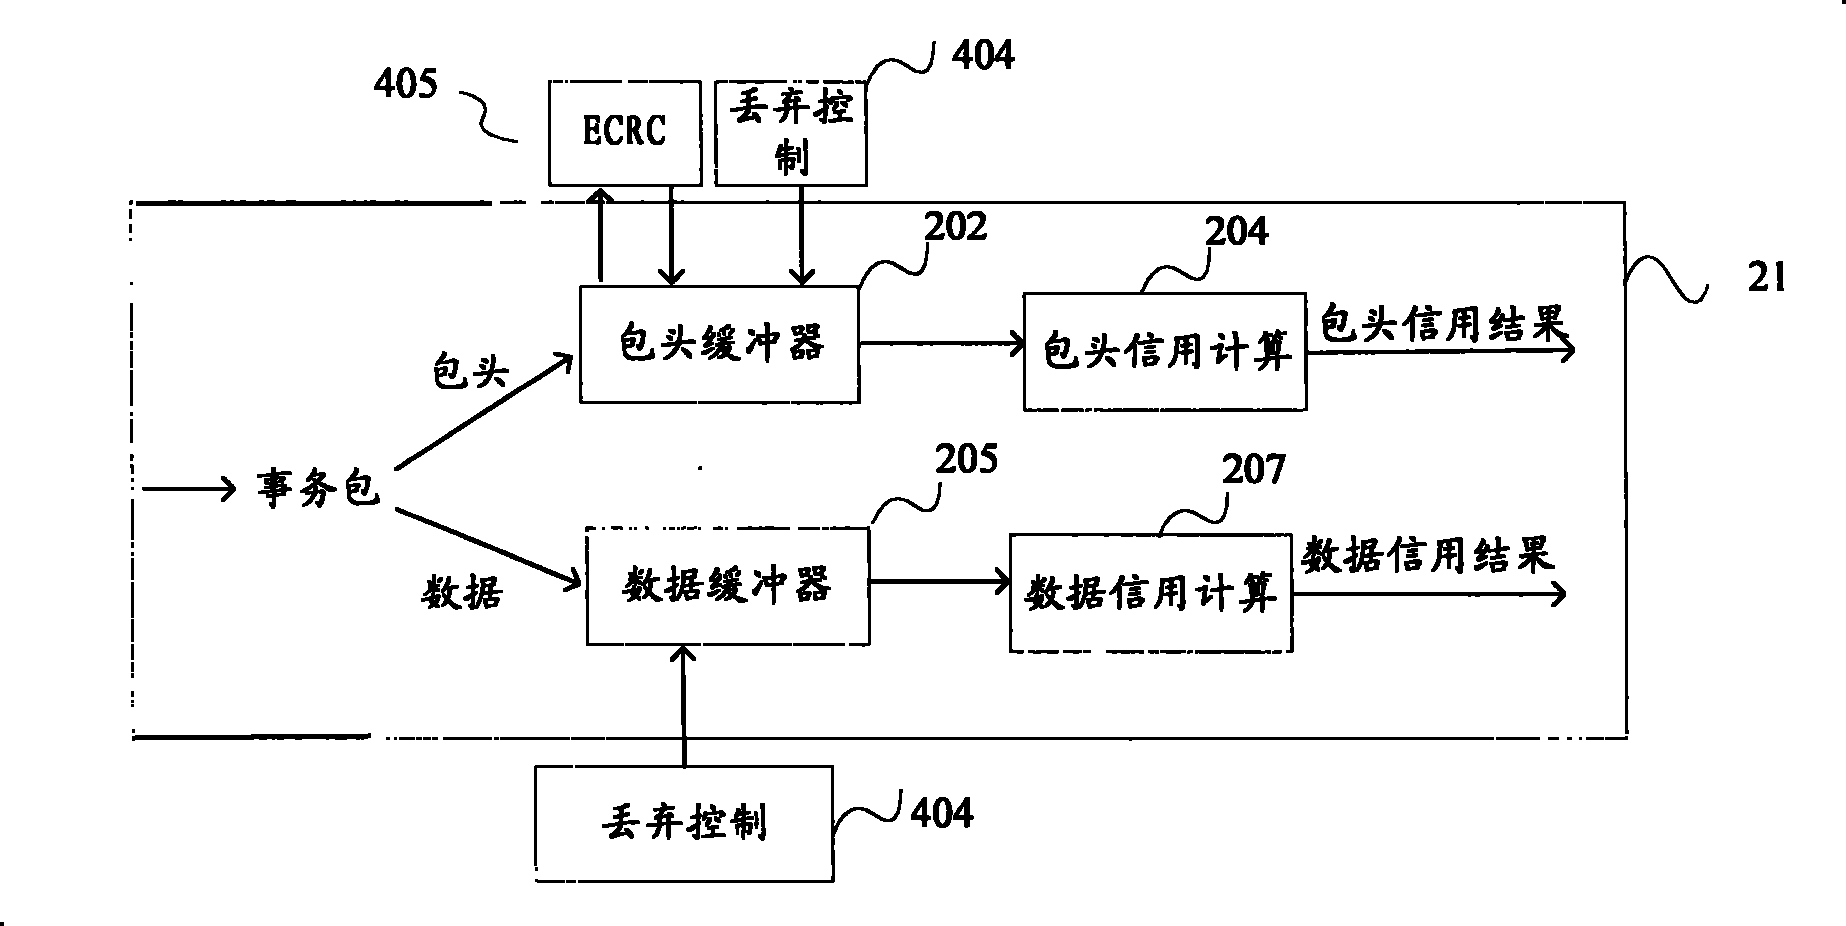 Credit processing equipment and flow control transmission apparatus and method thereof